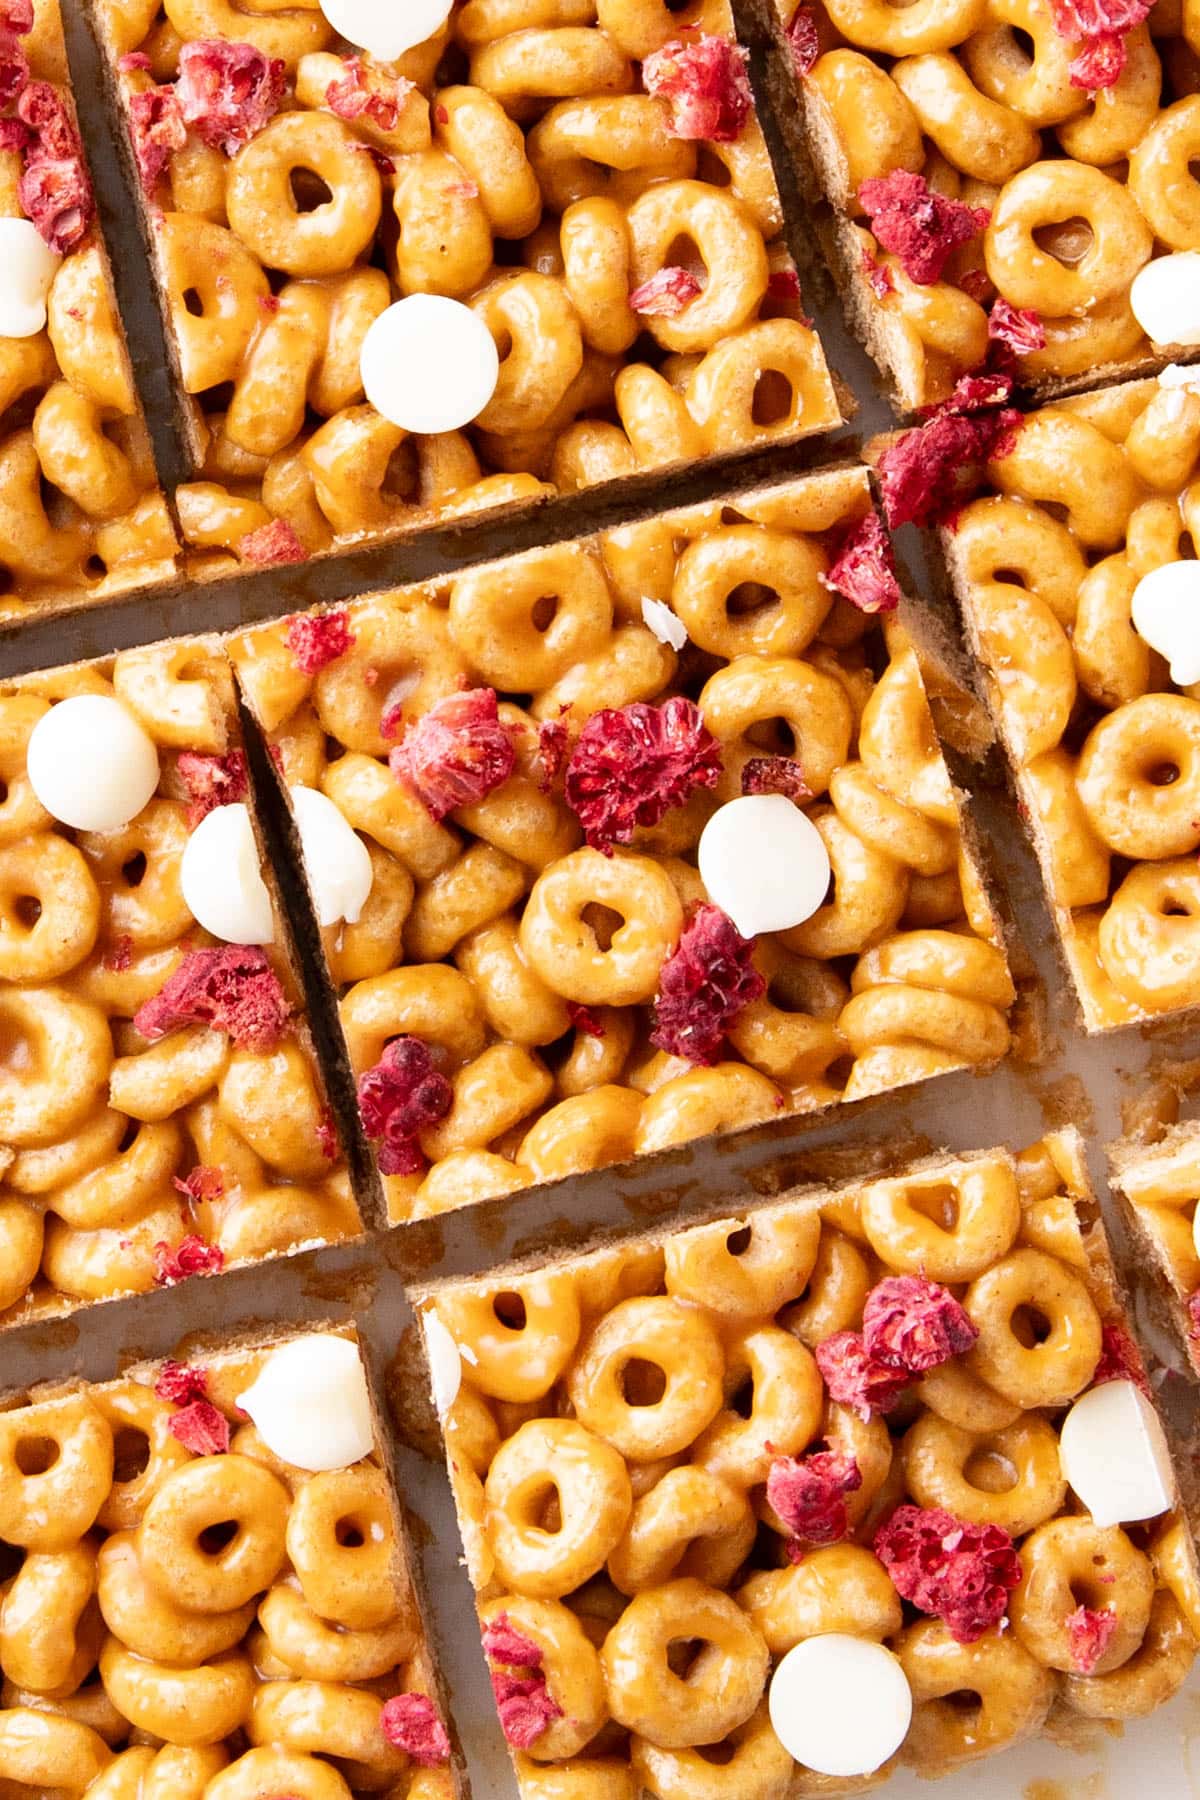 Super close up of cereal bars